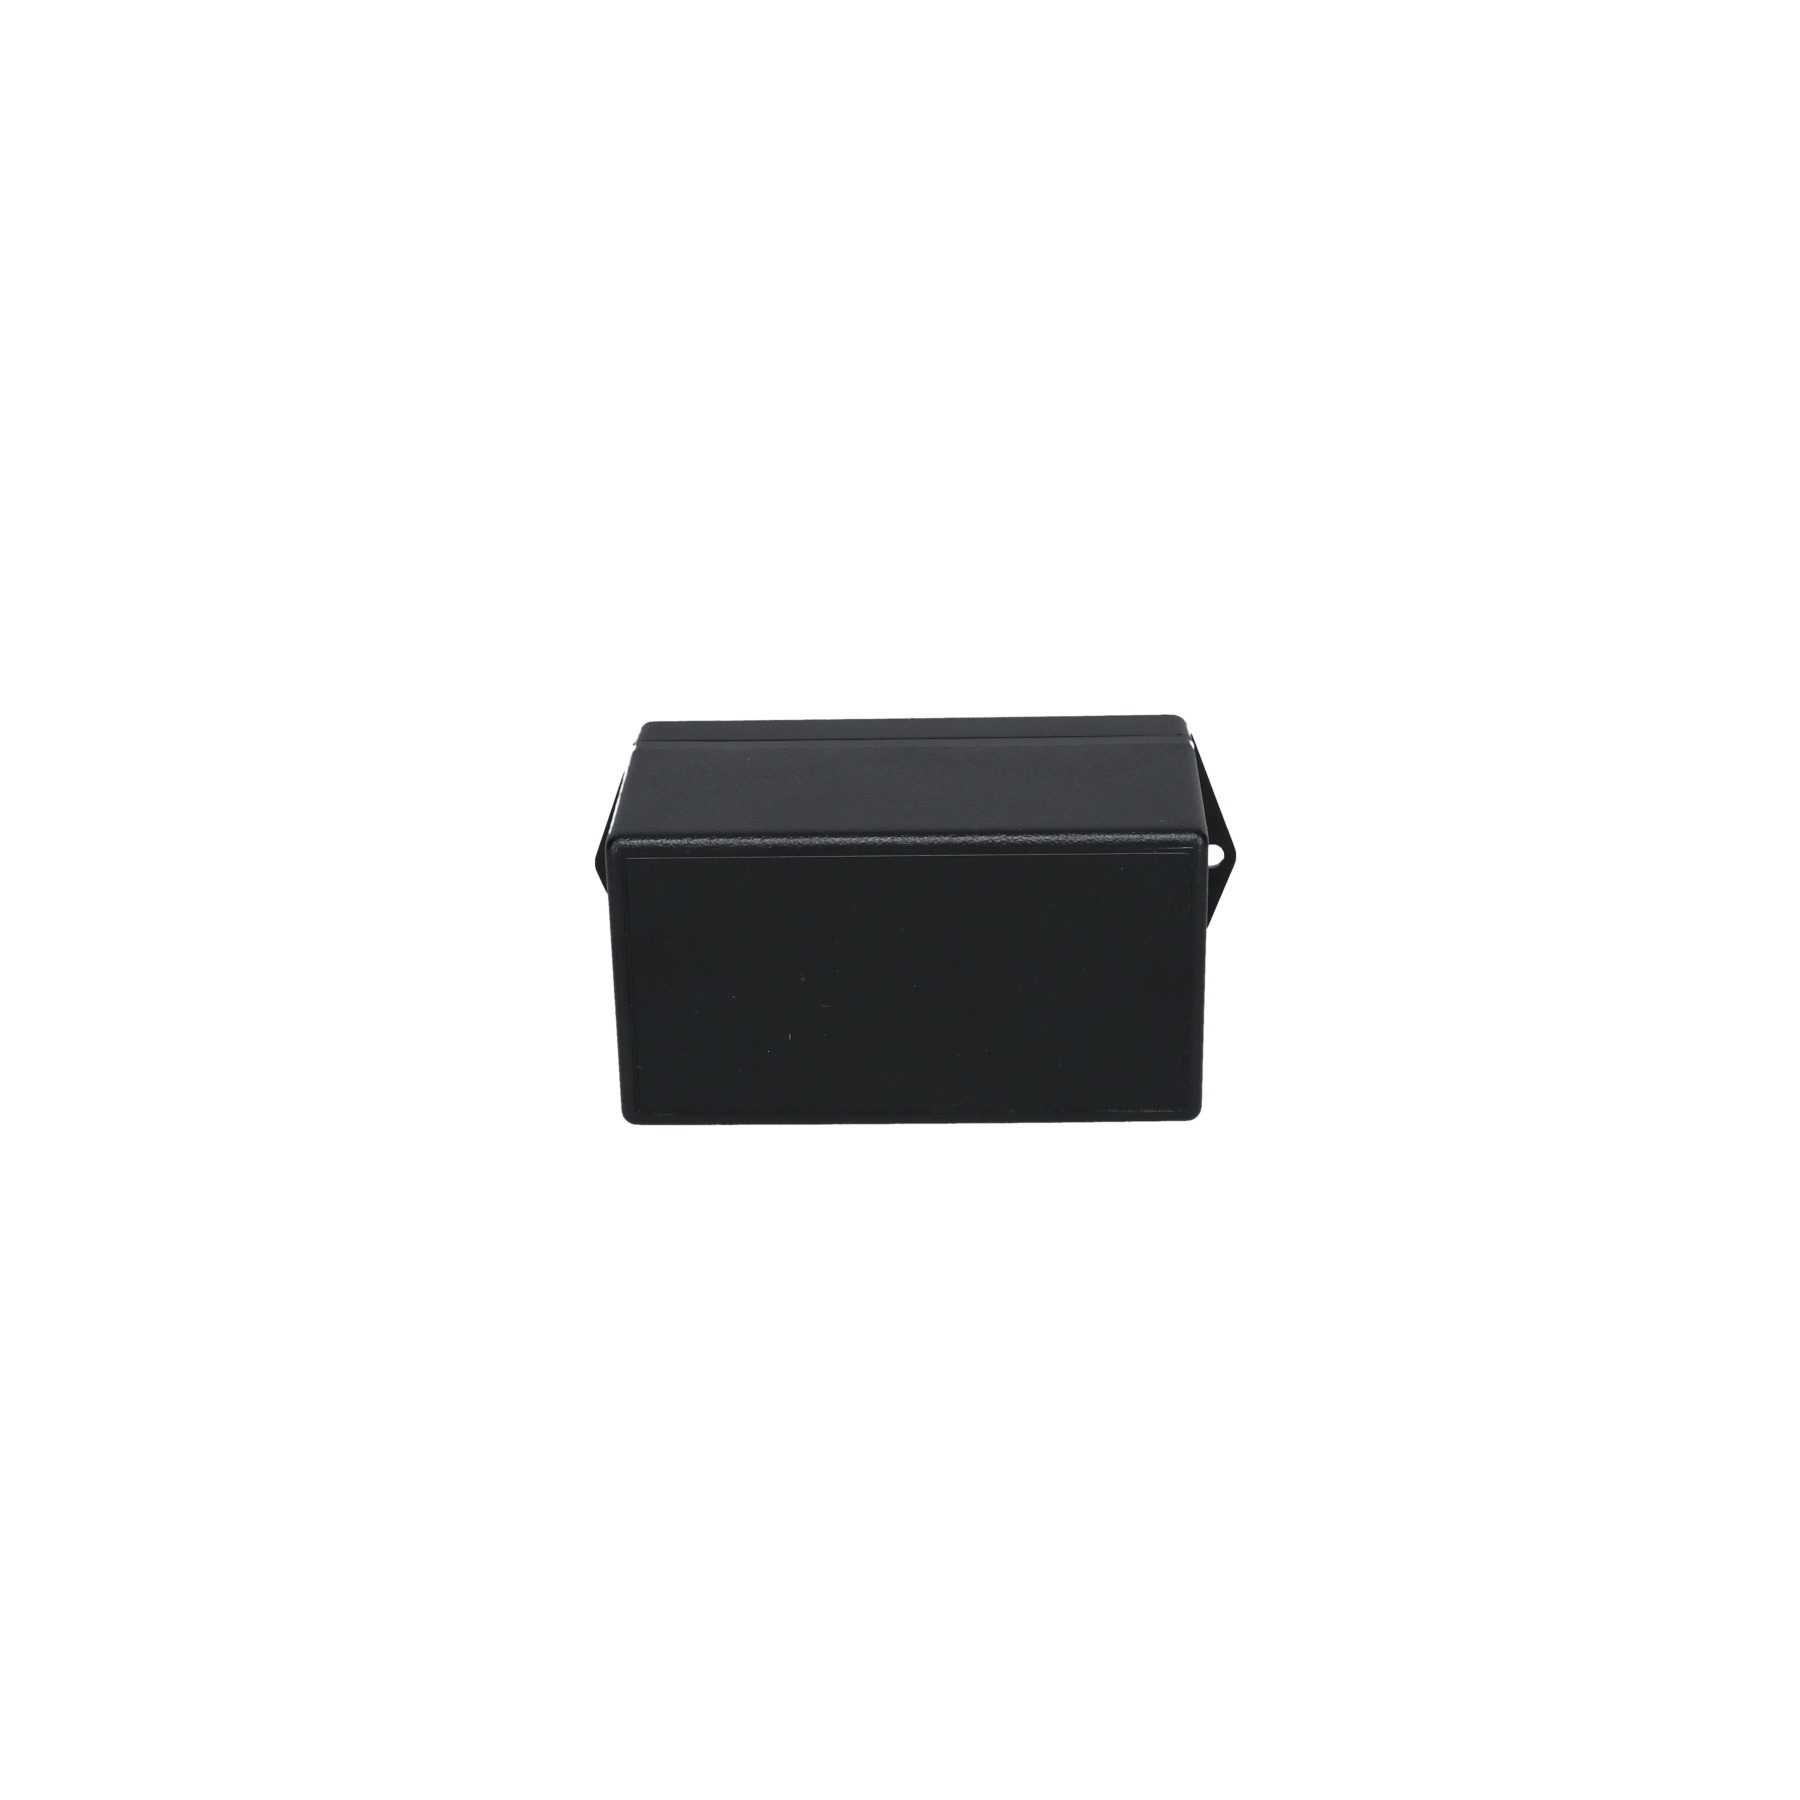 Utilibox Style H Plastic Utility Box with Mounting Flanges CU-1475-MB